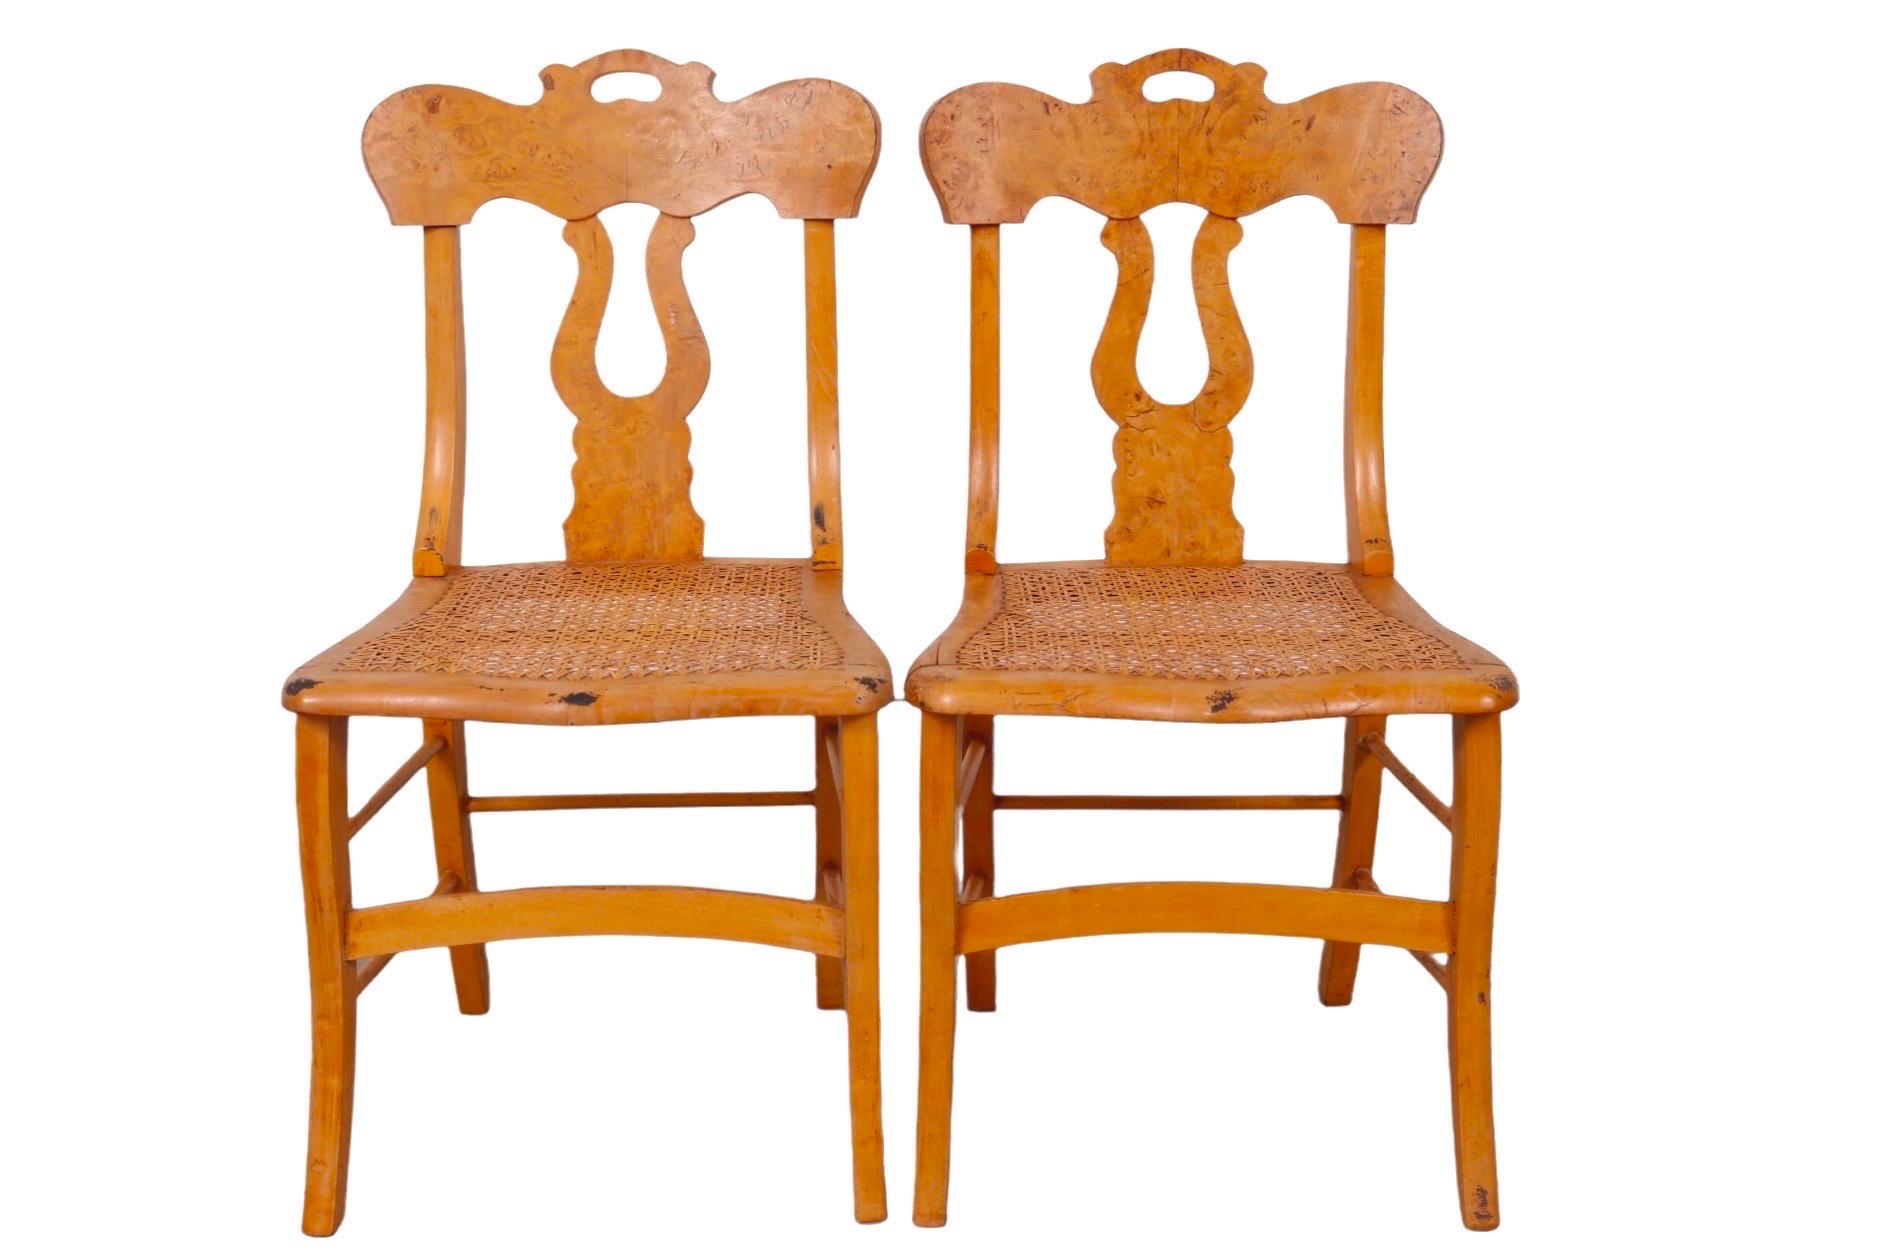 A pair of empire style side chairs dating from the late 1800’s. Seat backs are decorated with perched crest rails and lyre back splats covered in rich burlwood veneers. Hand caned seats are raised on saber legs, supported with box stretchers.